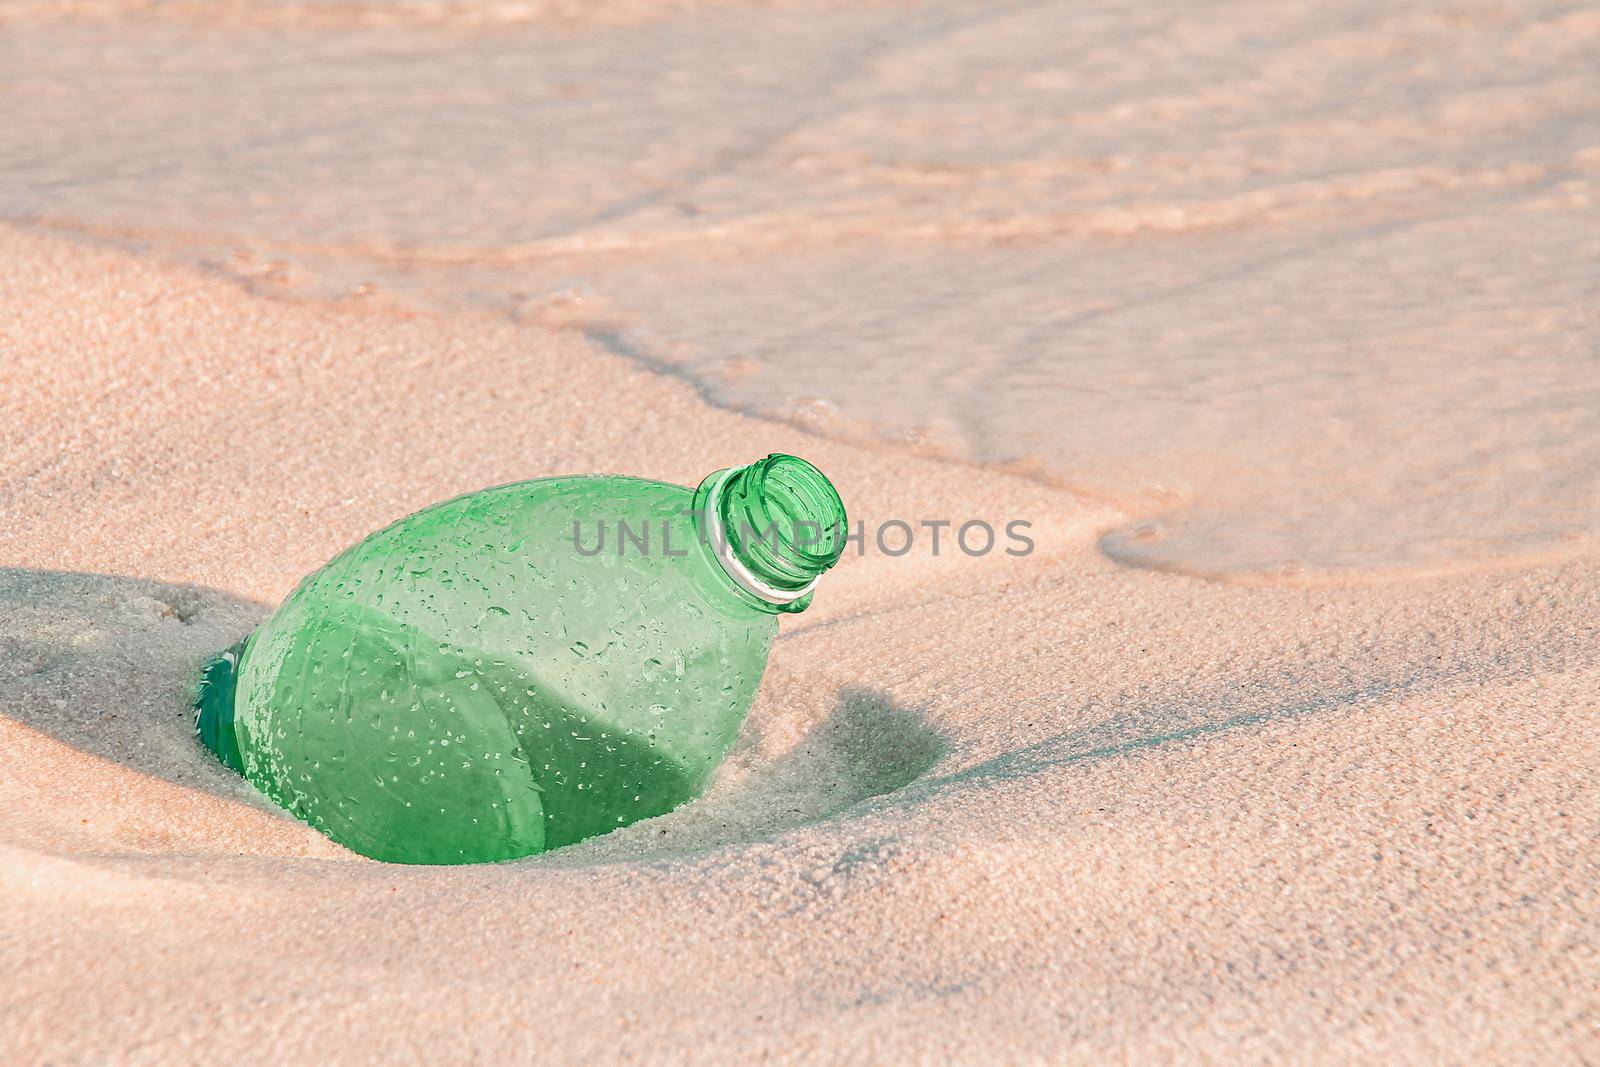 Plastic Water Bottle Discarded at the Beach by Sonnet15